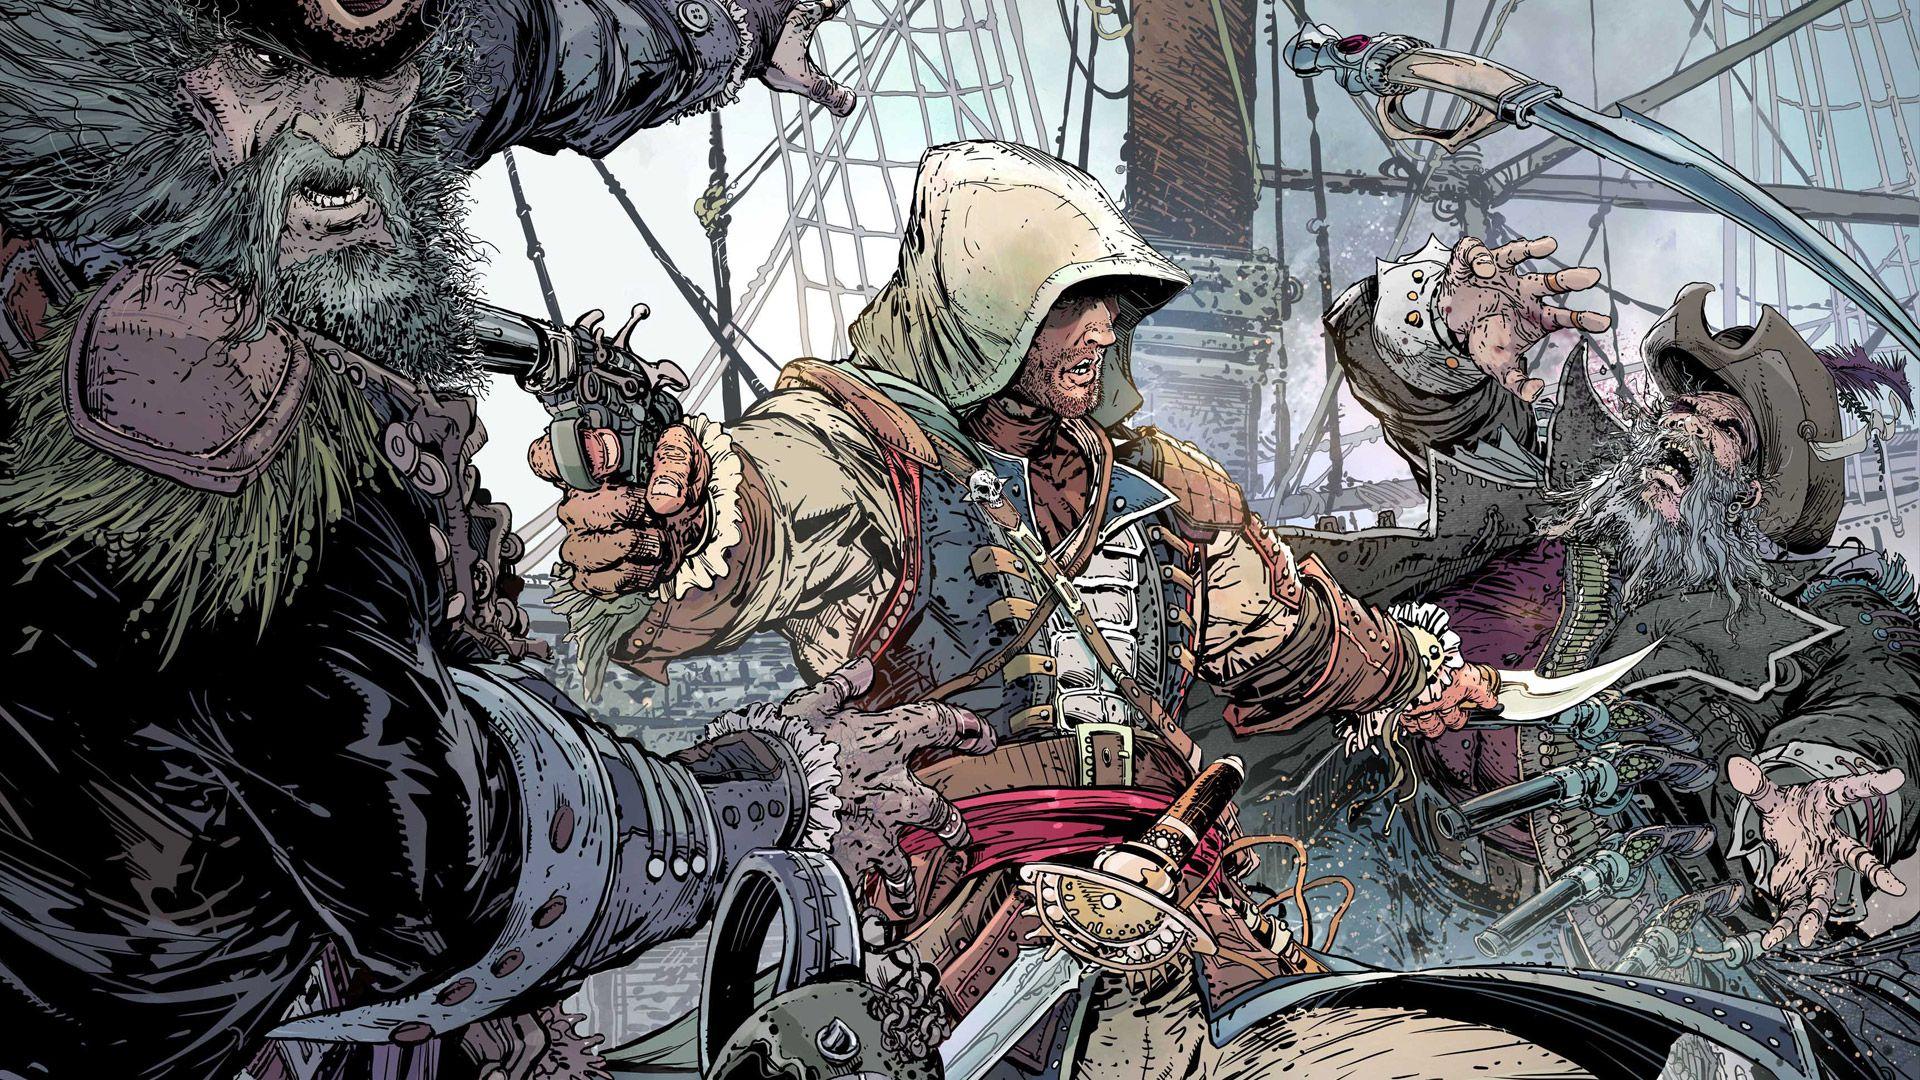 Wallpapers Wallpapers from Assassin's Creed IV: Black Flag